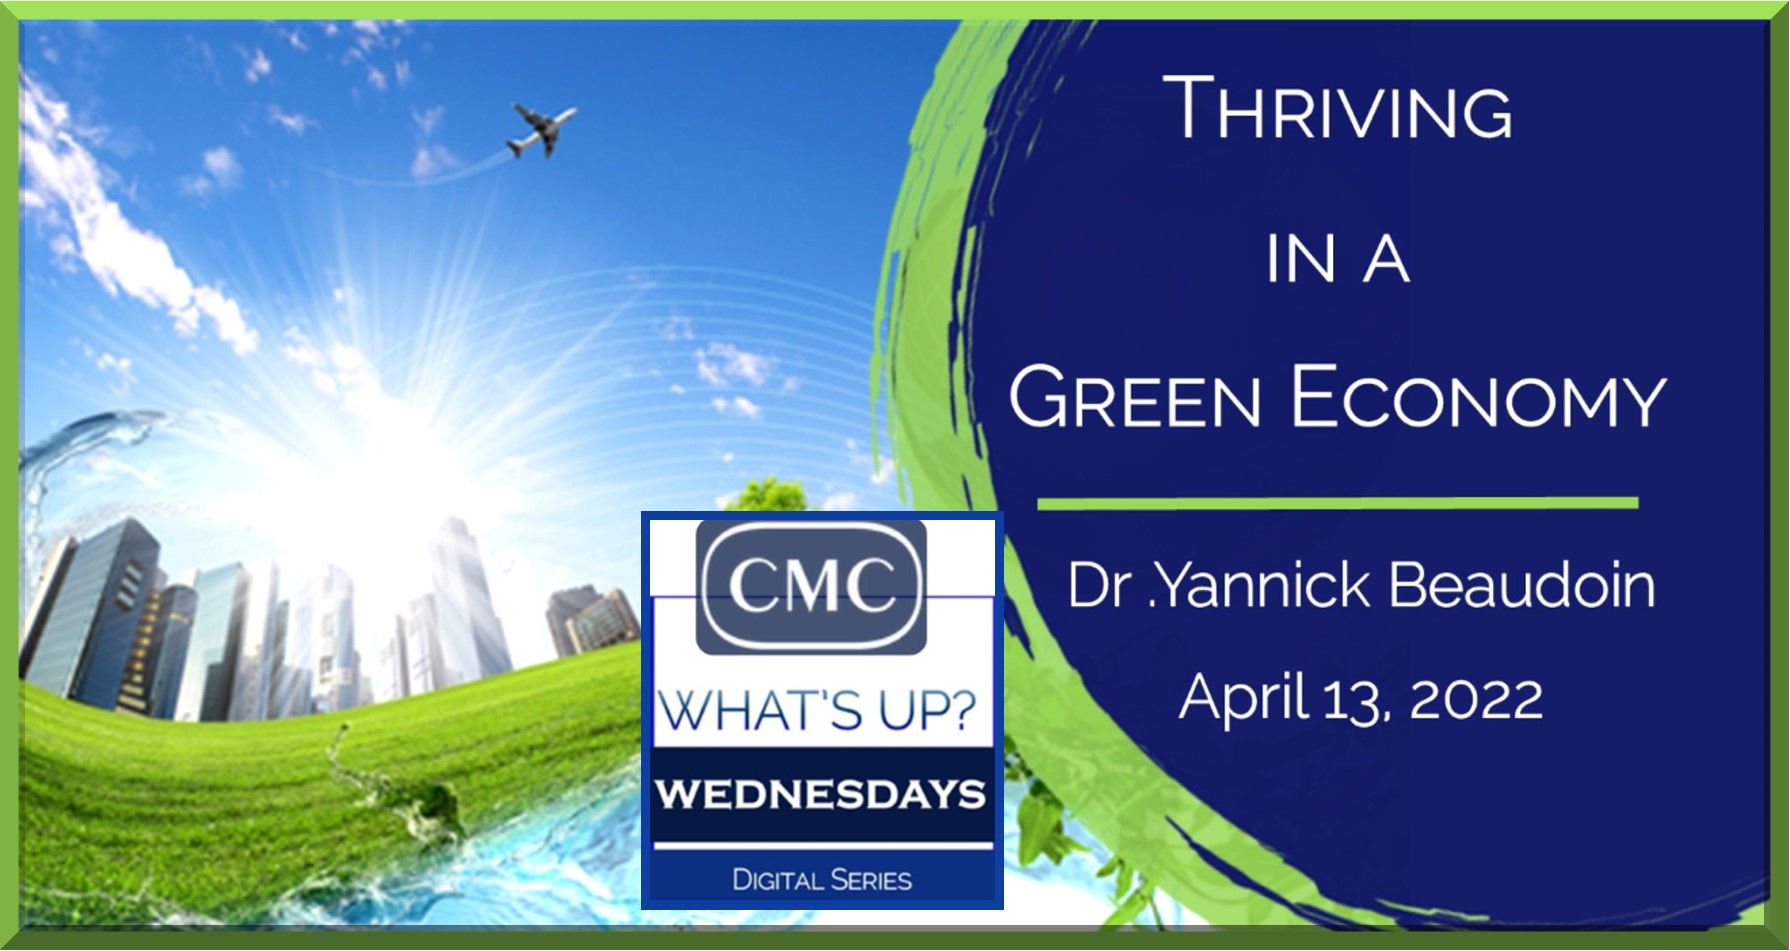 What's up Wednesday - Thriving in a Green Economy